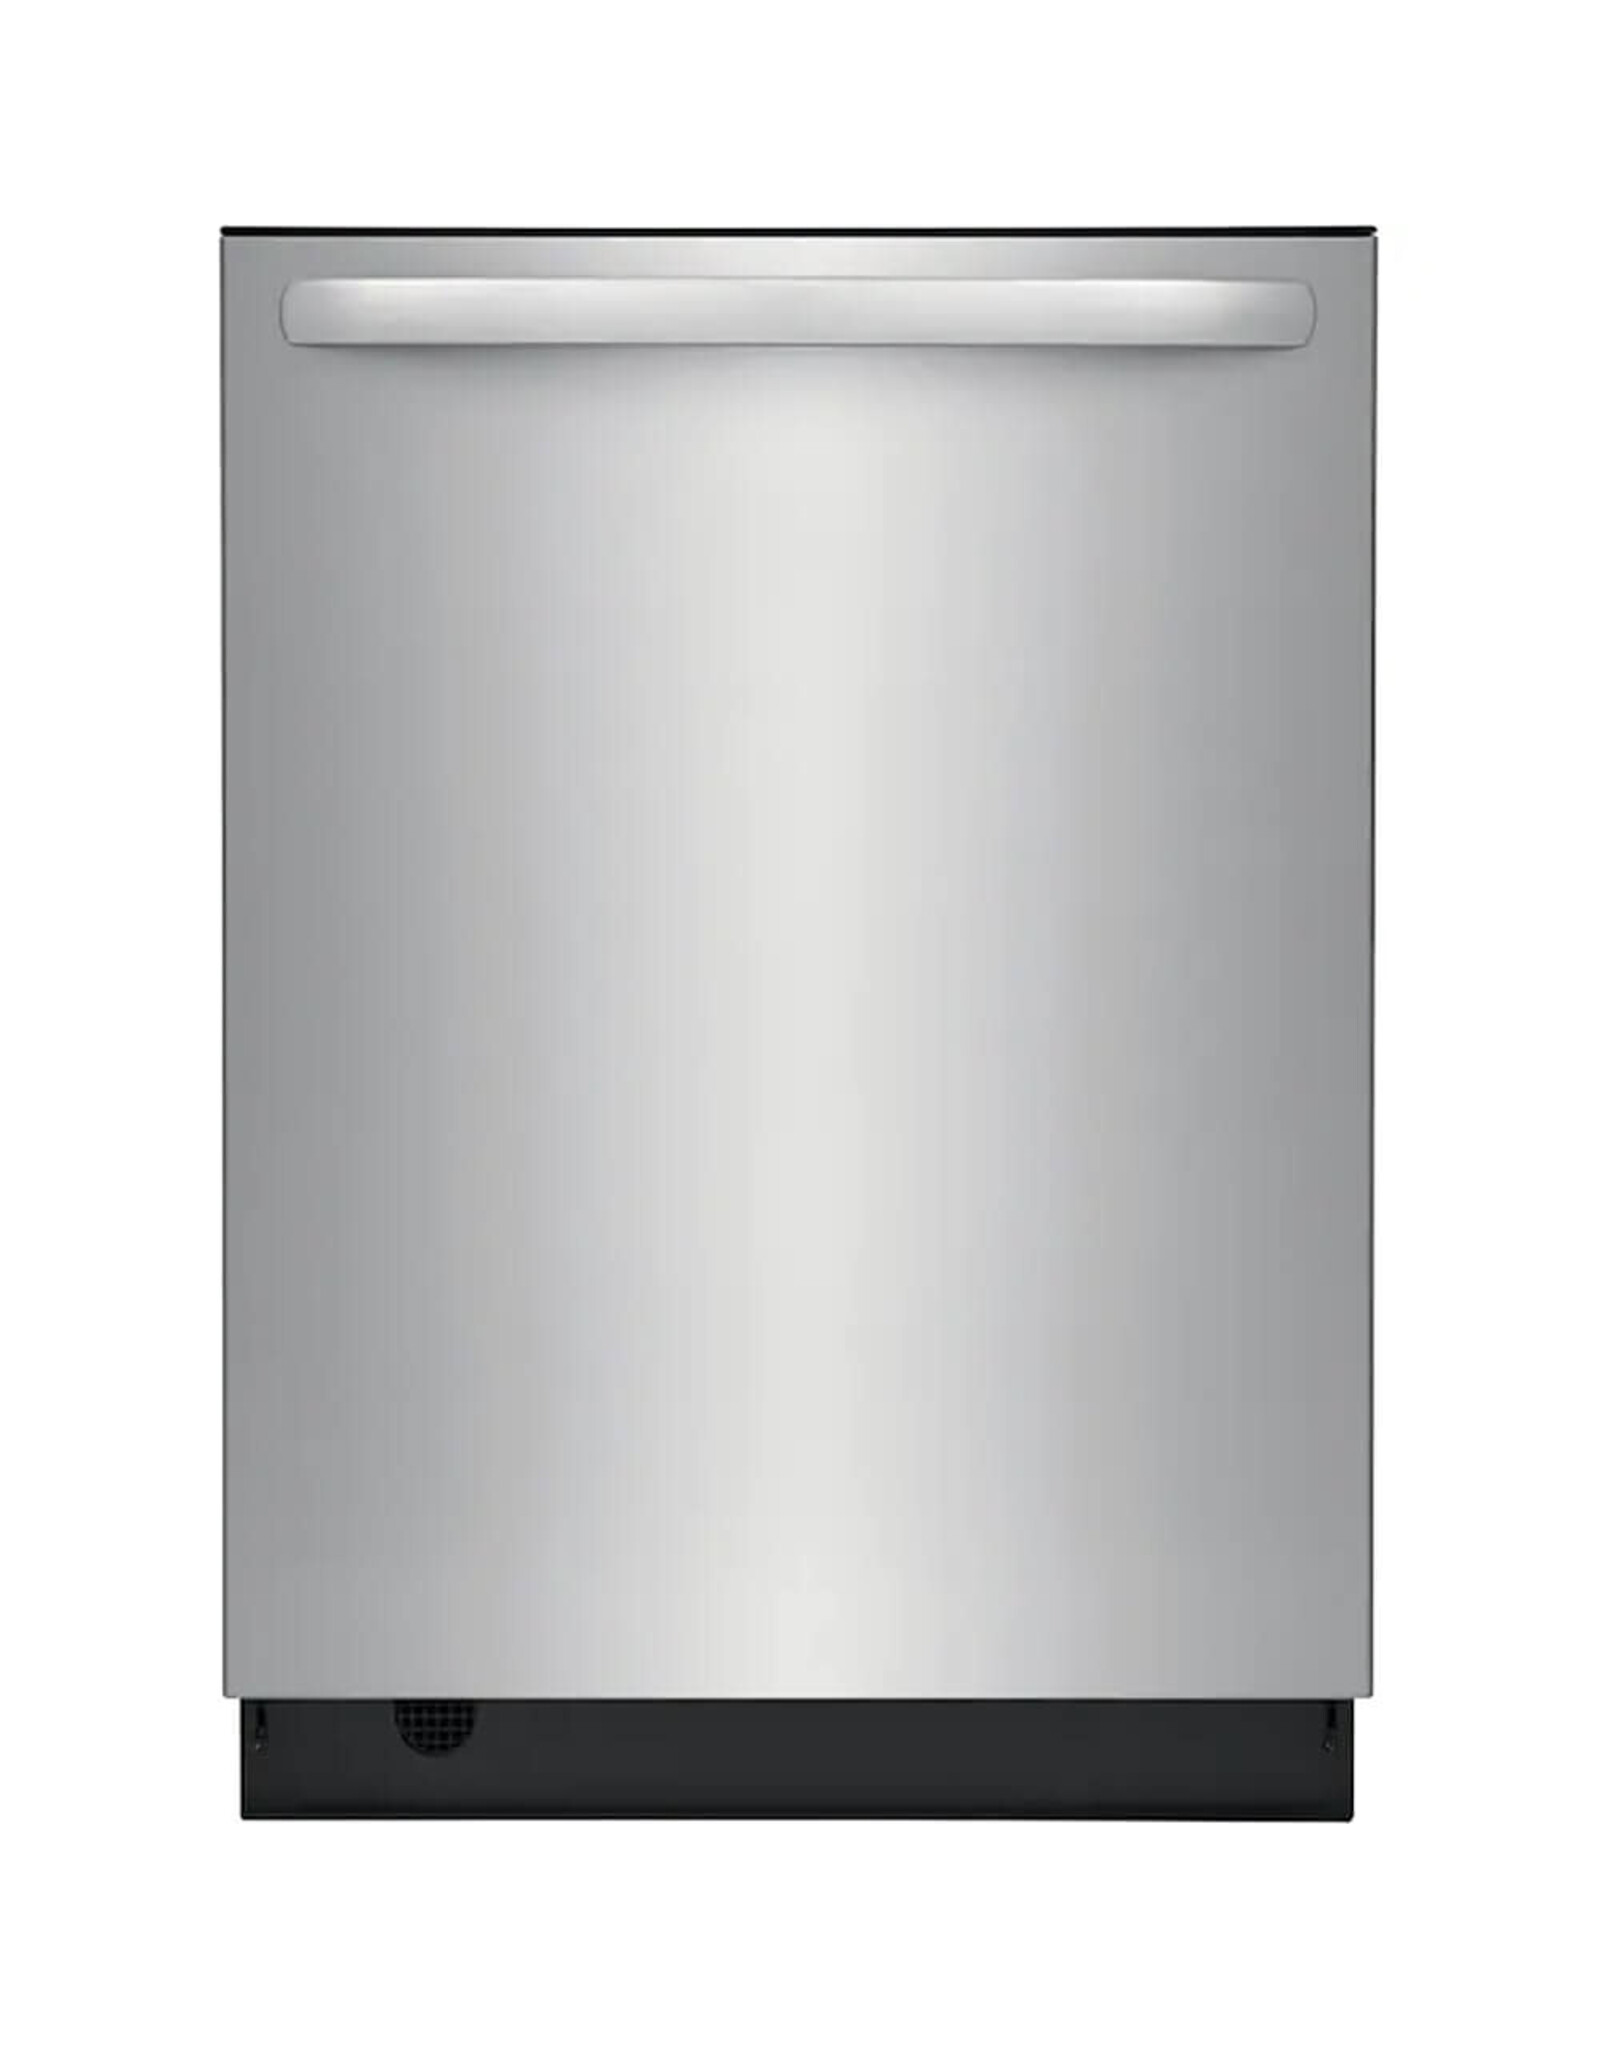 FRIGIDAIRE FDSH450LAFA  Frigidaire Stainless Steel Tub Top Control 24-in Built-In Dishwasher With Third Rack (Fingerprint Resistant Stainless Steel) ENERGY STAR, 49-dBA